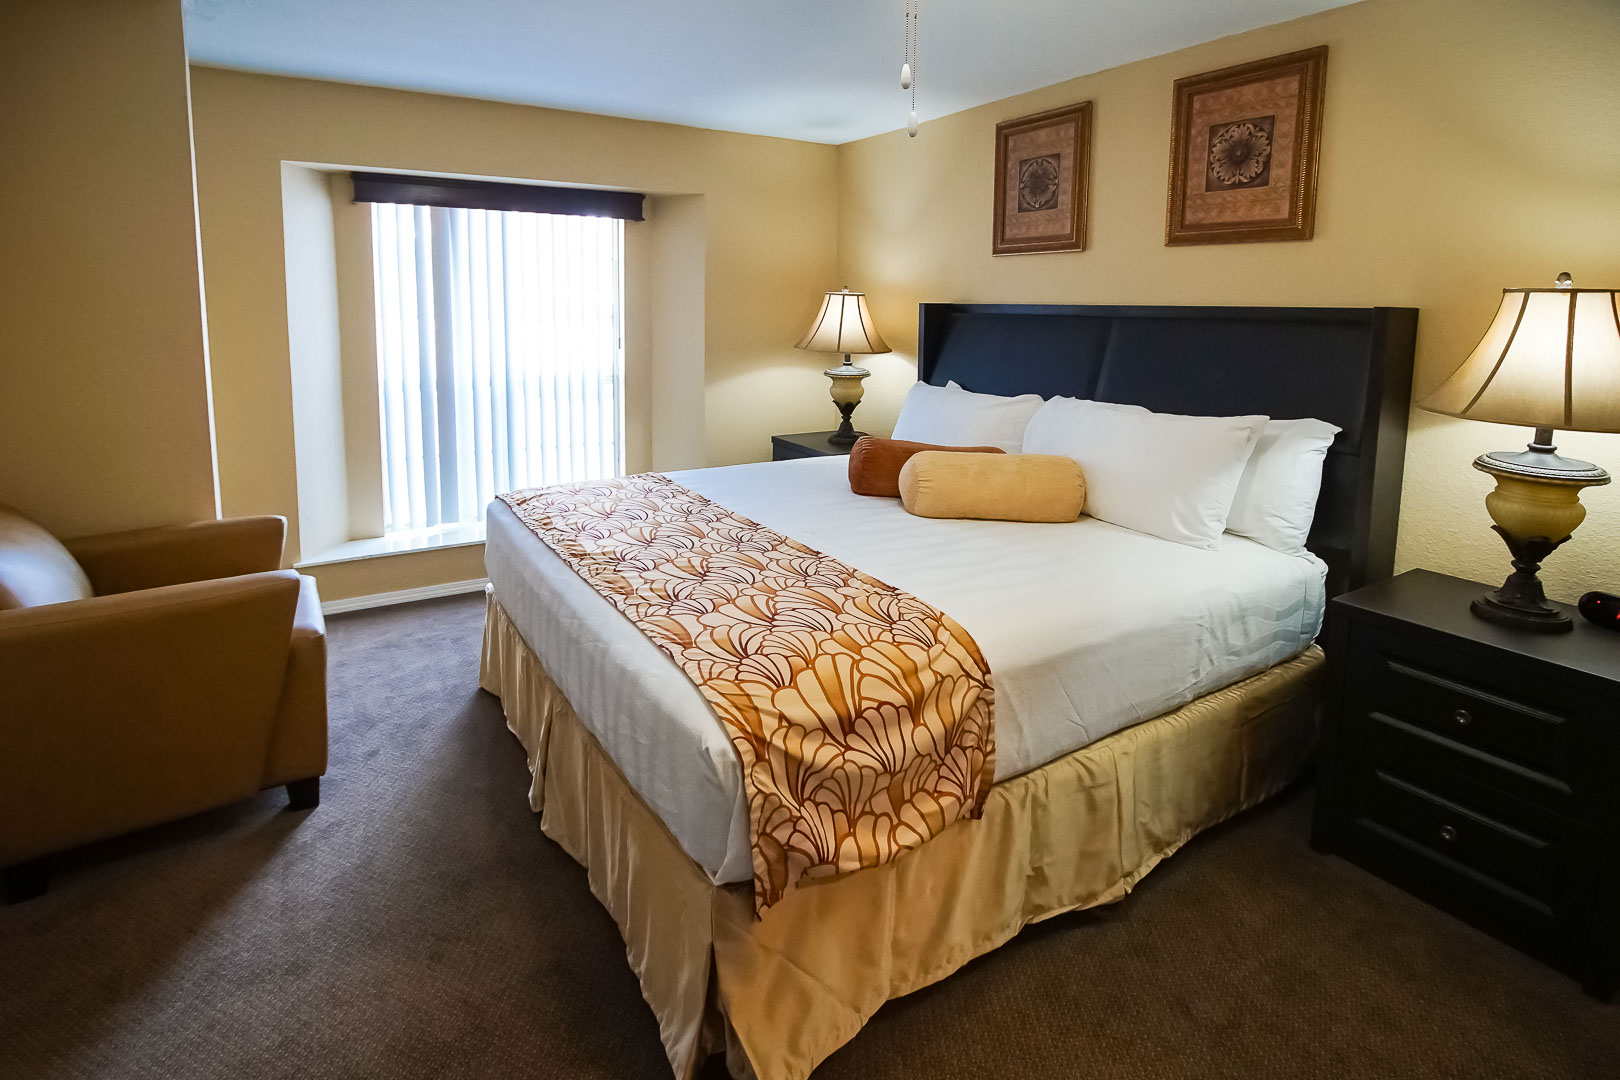 A spacious master bedroom at The Townhouses Resort in Branson, Missouri.